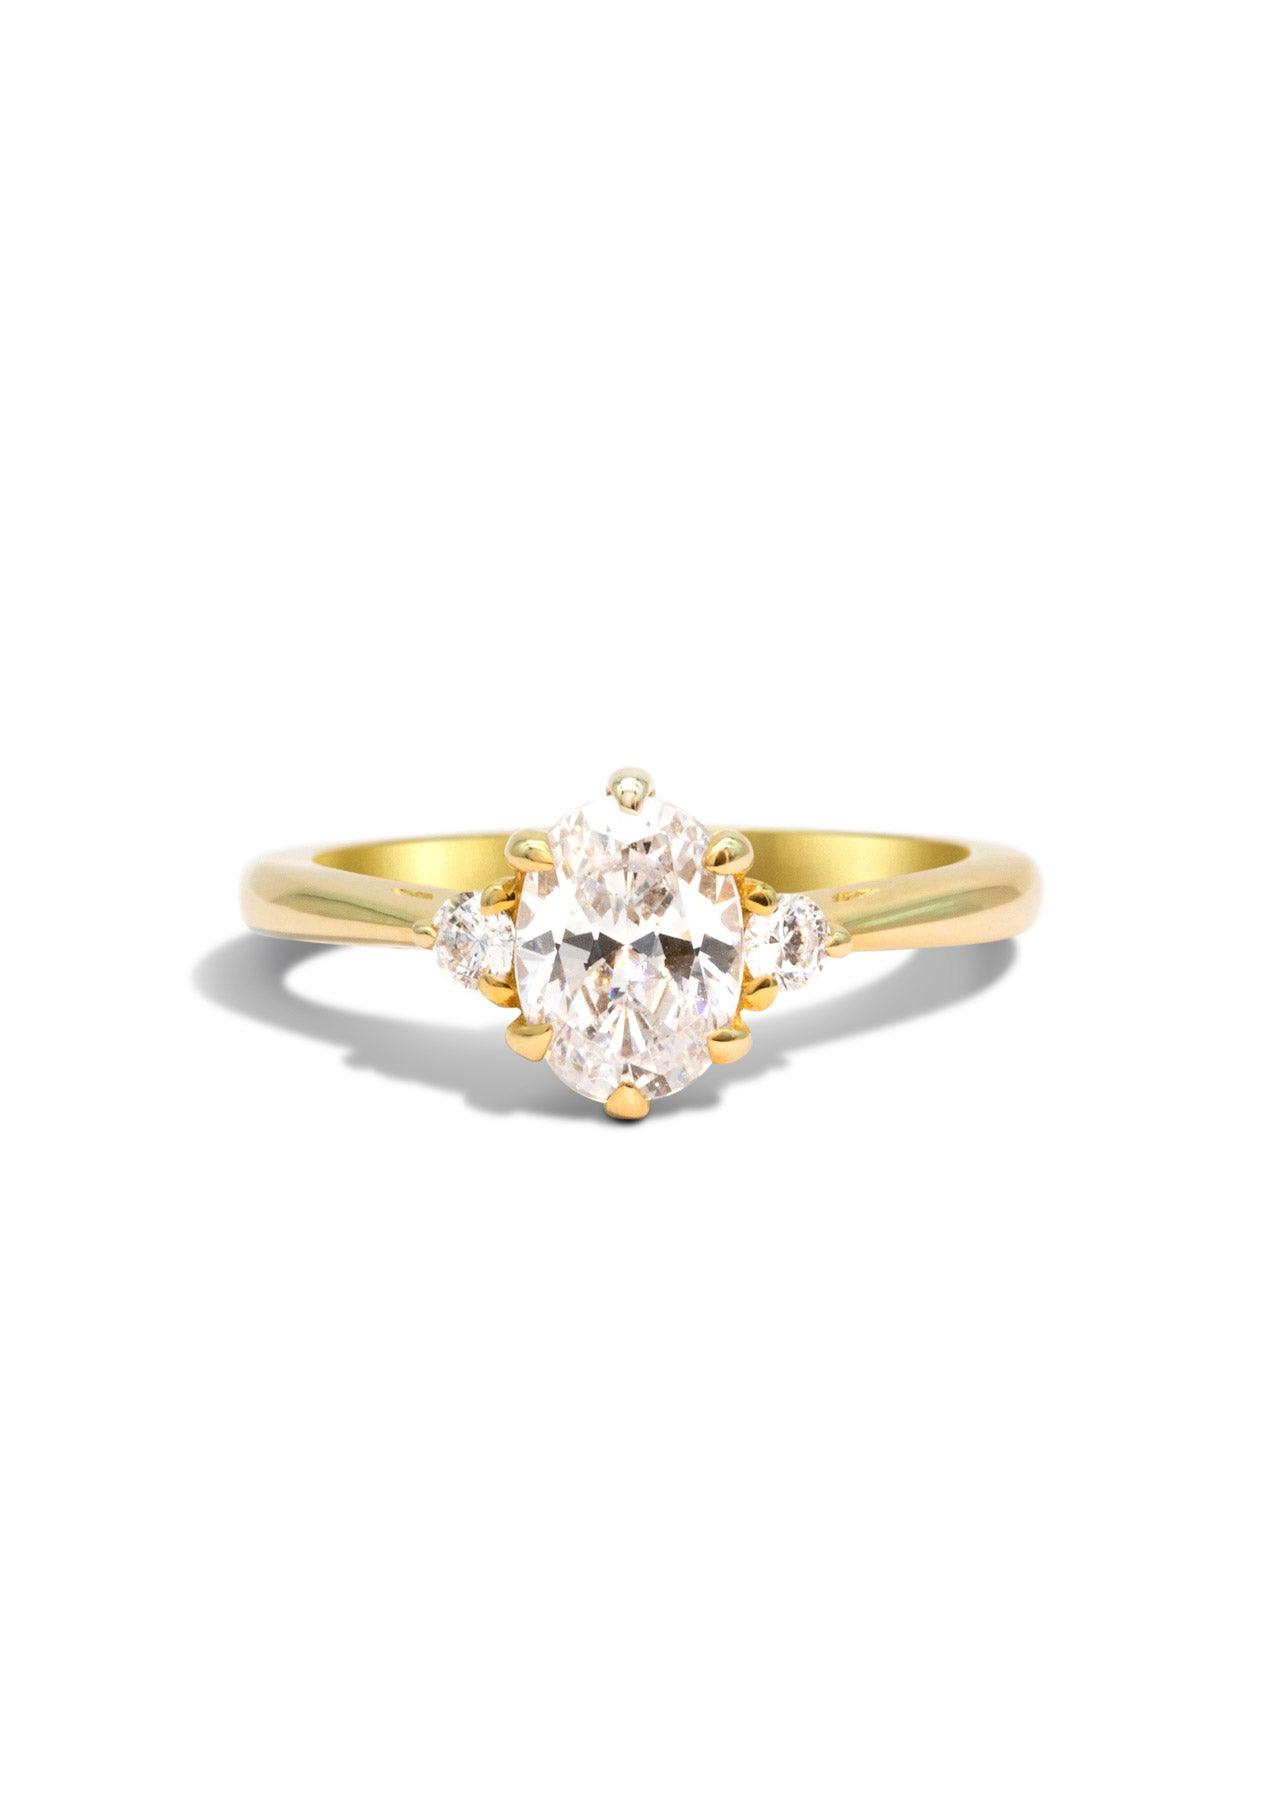 The Esme Yellow Gold Cultured Diamond Ring